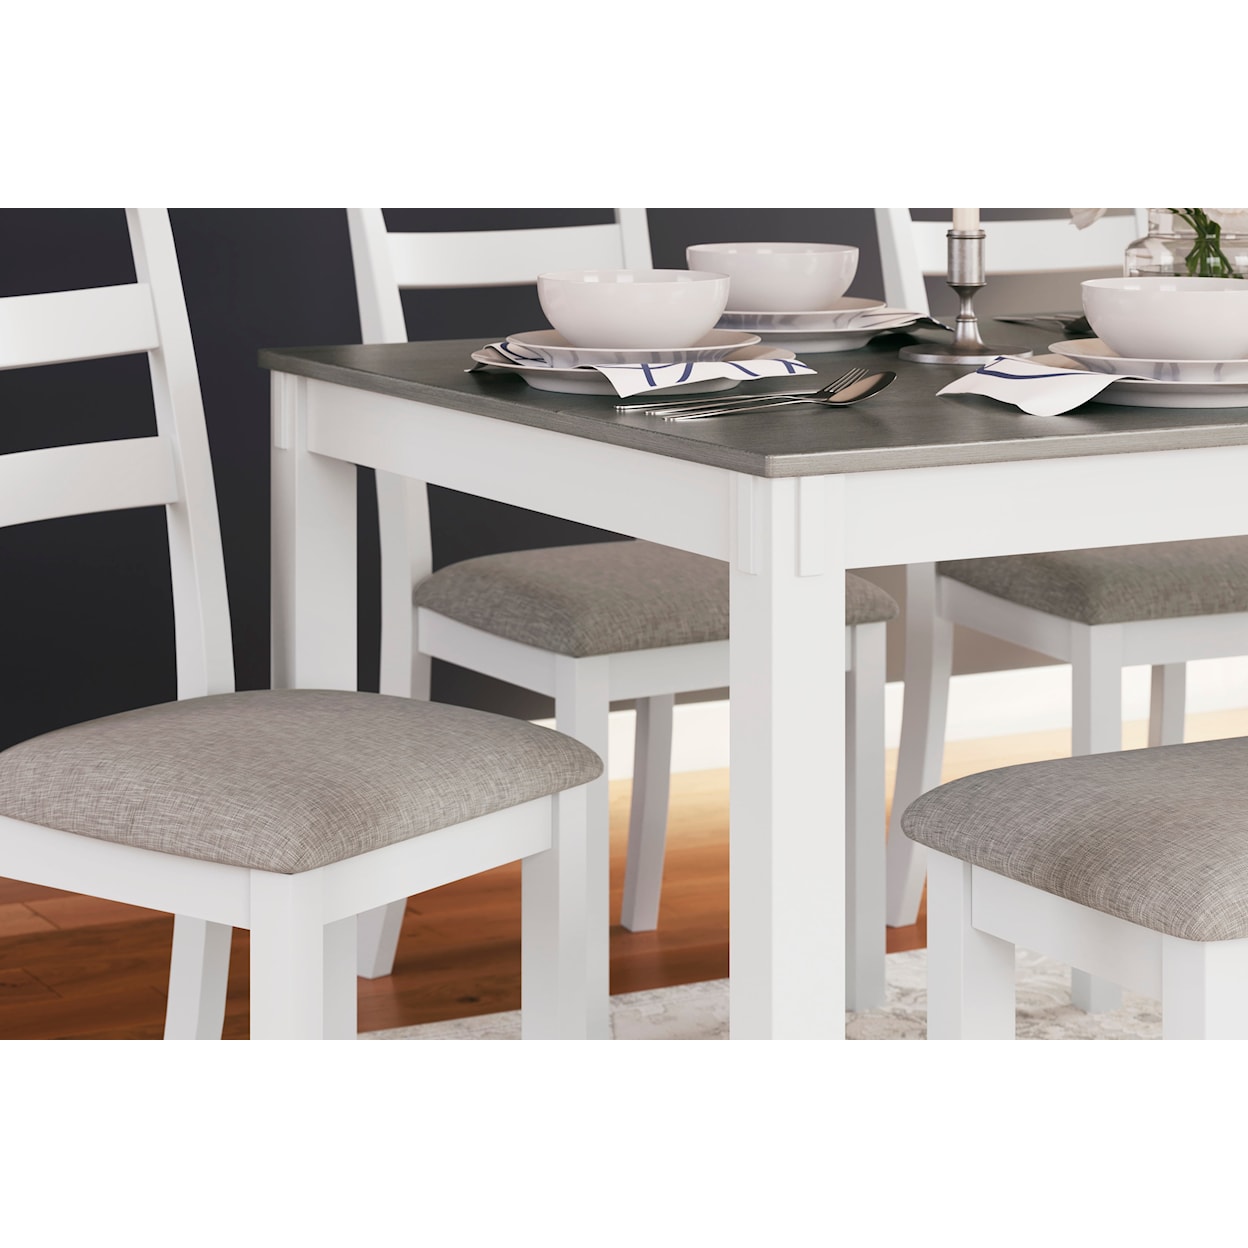 Signature Design Stonehollow Dining Table and Chairs with Bench Set